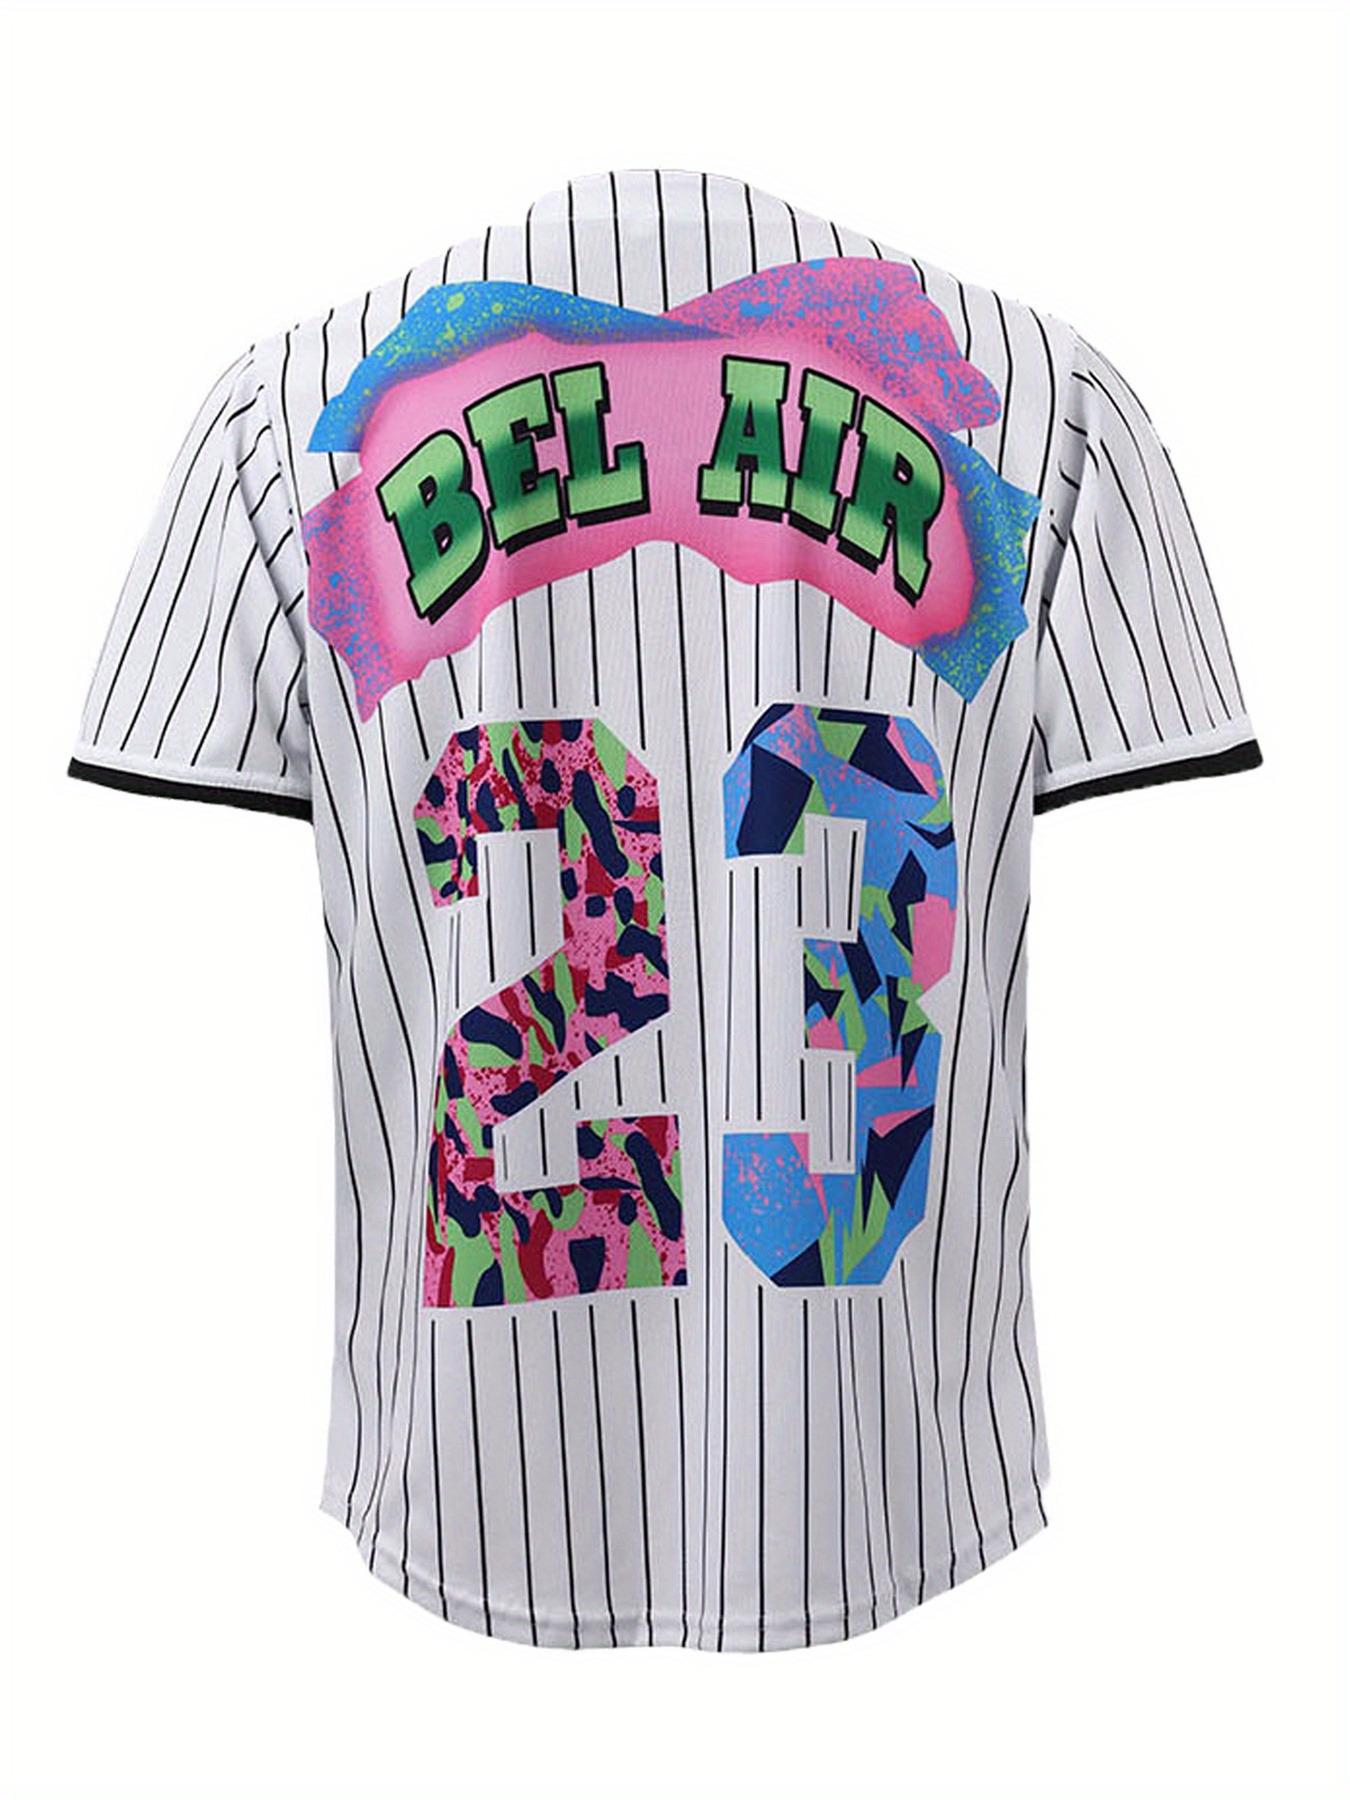 Temu Men's Bel Air #23 24 30 Baseball Jersey, 90's City Theme Party Clothing, Hip Hop Fashion Button Up Short Sleeve Shirt Suitable for Birthday Parties